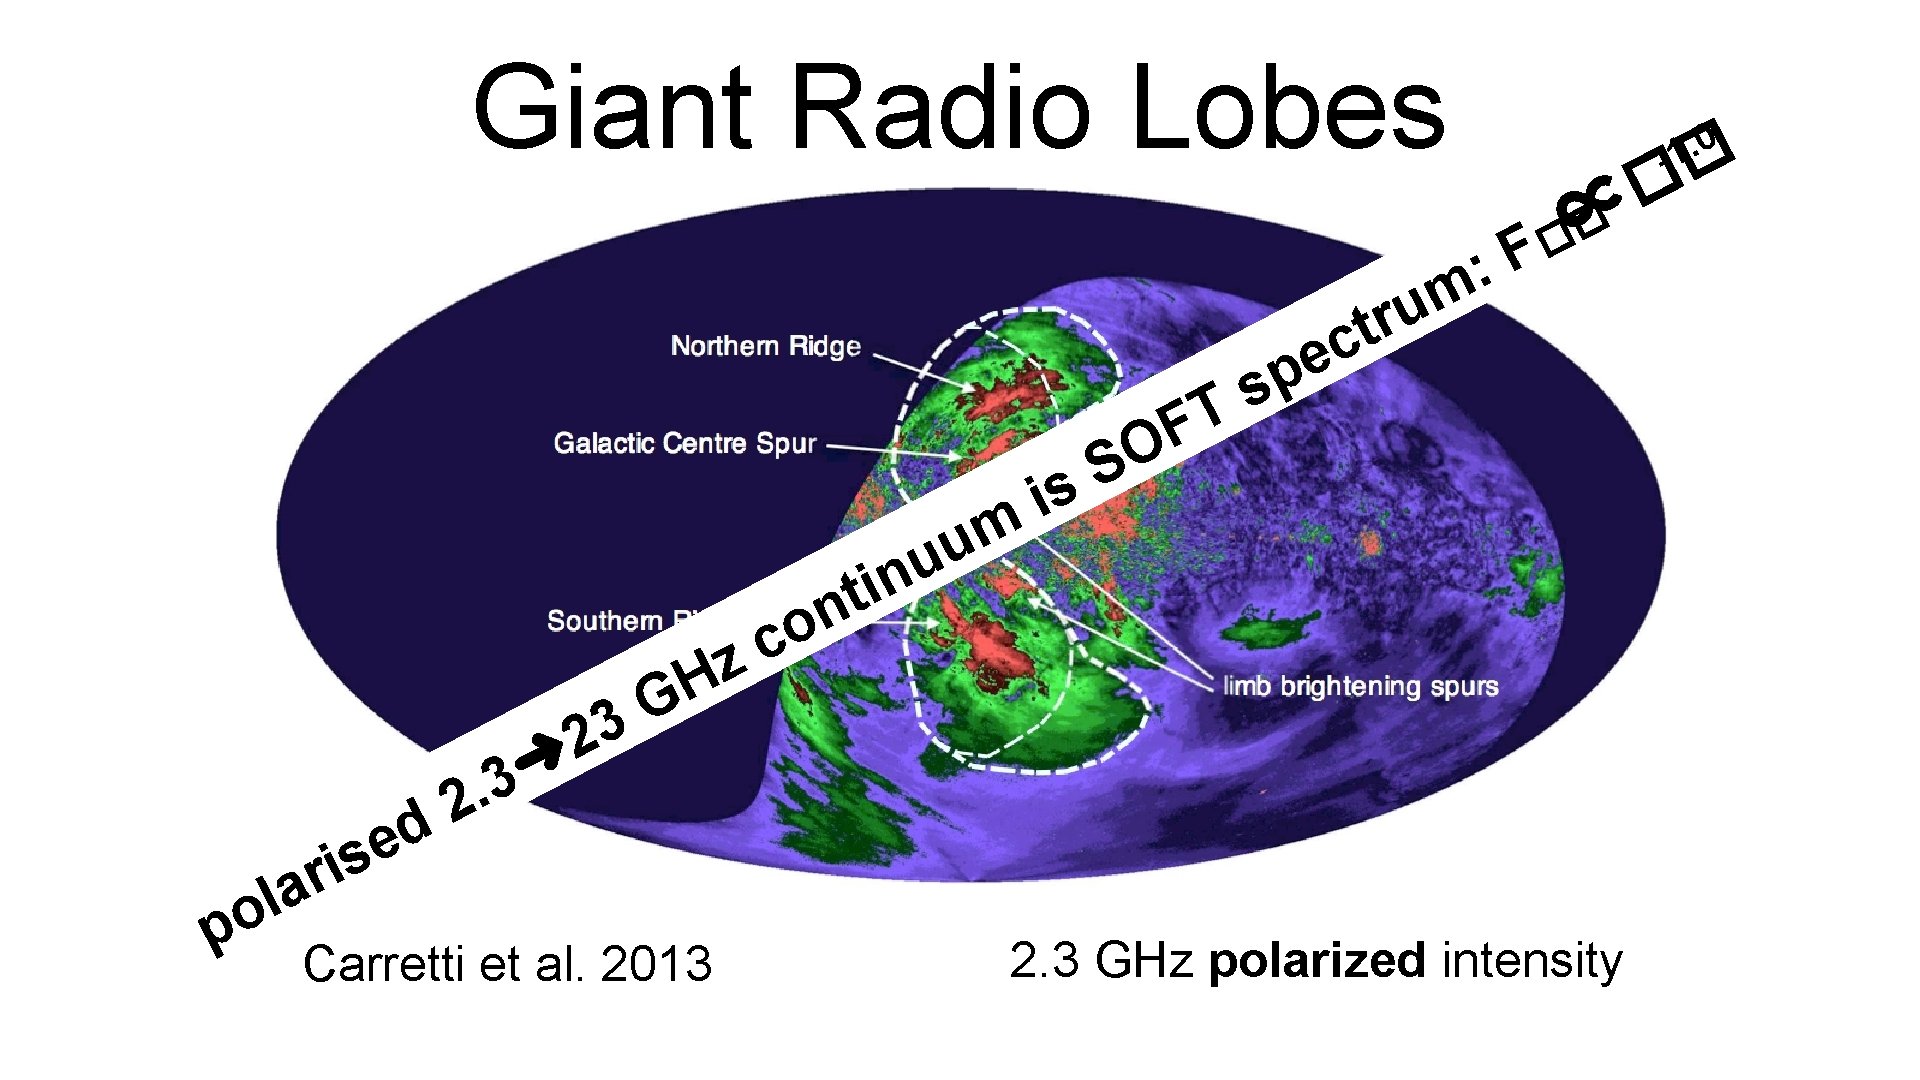 Giant Radio Lobes : m d e is 3. 2 z H 2 ➜